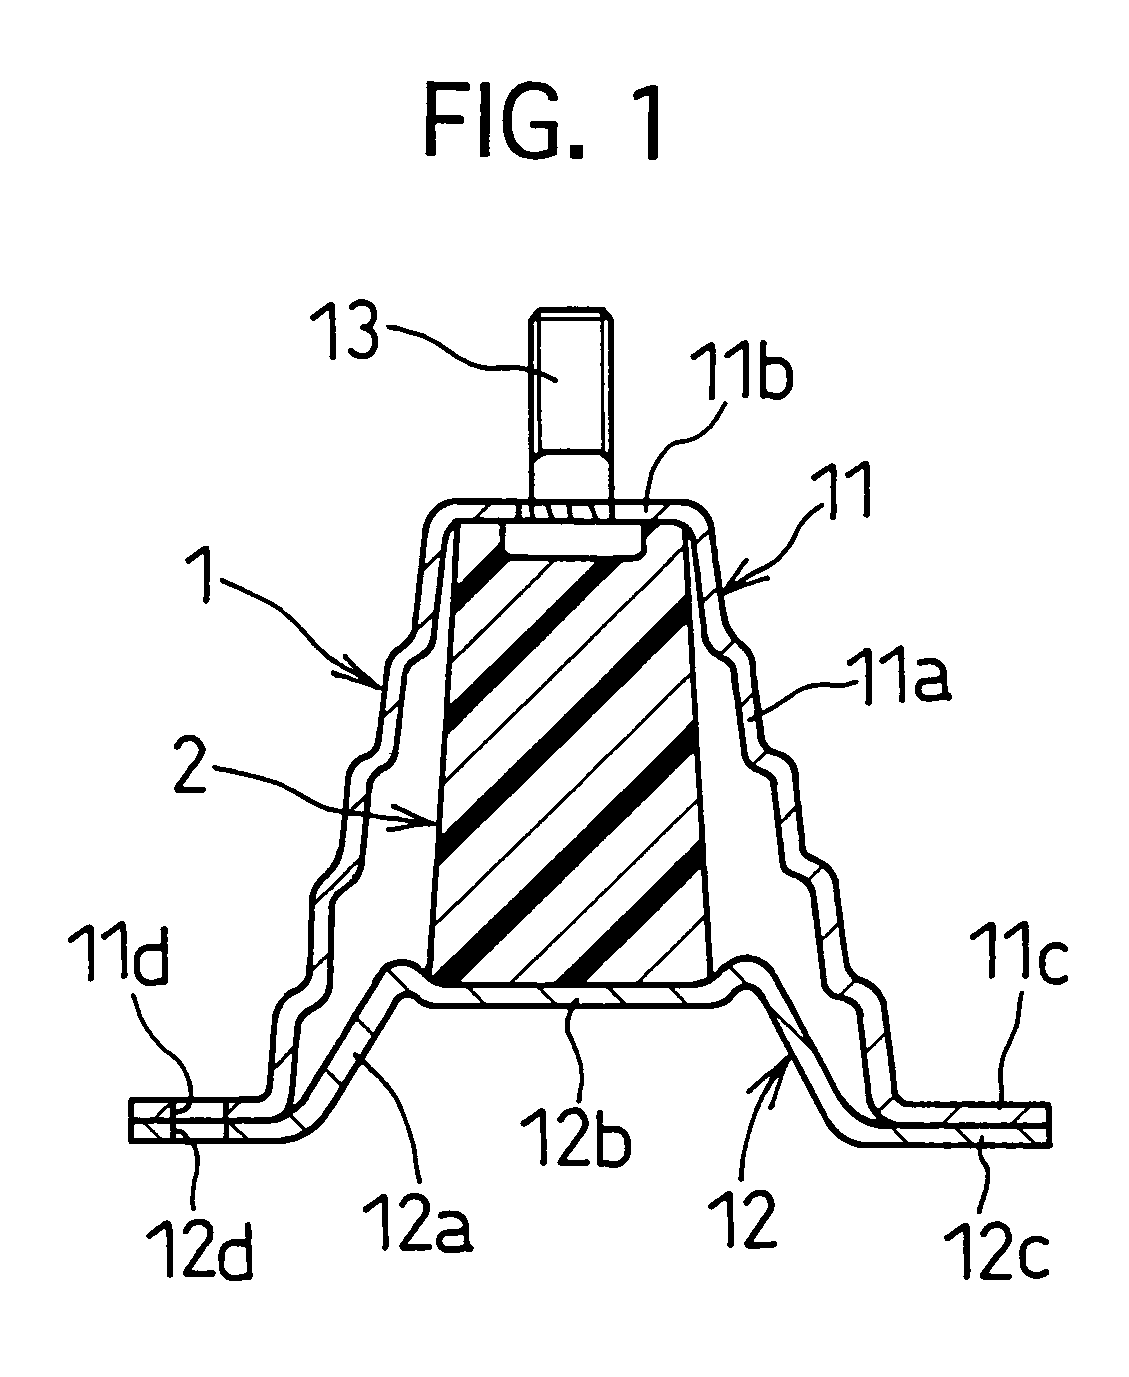 Shock absorber for vehicles